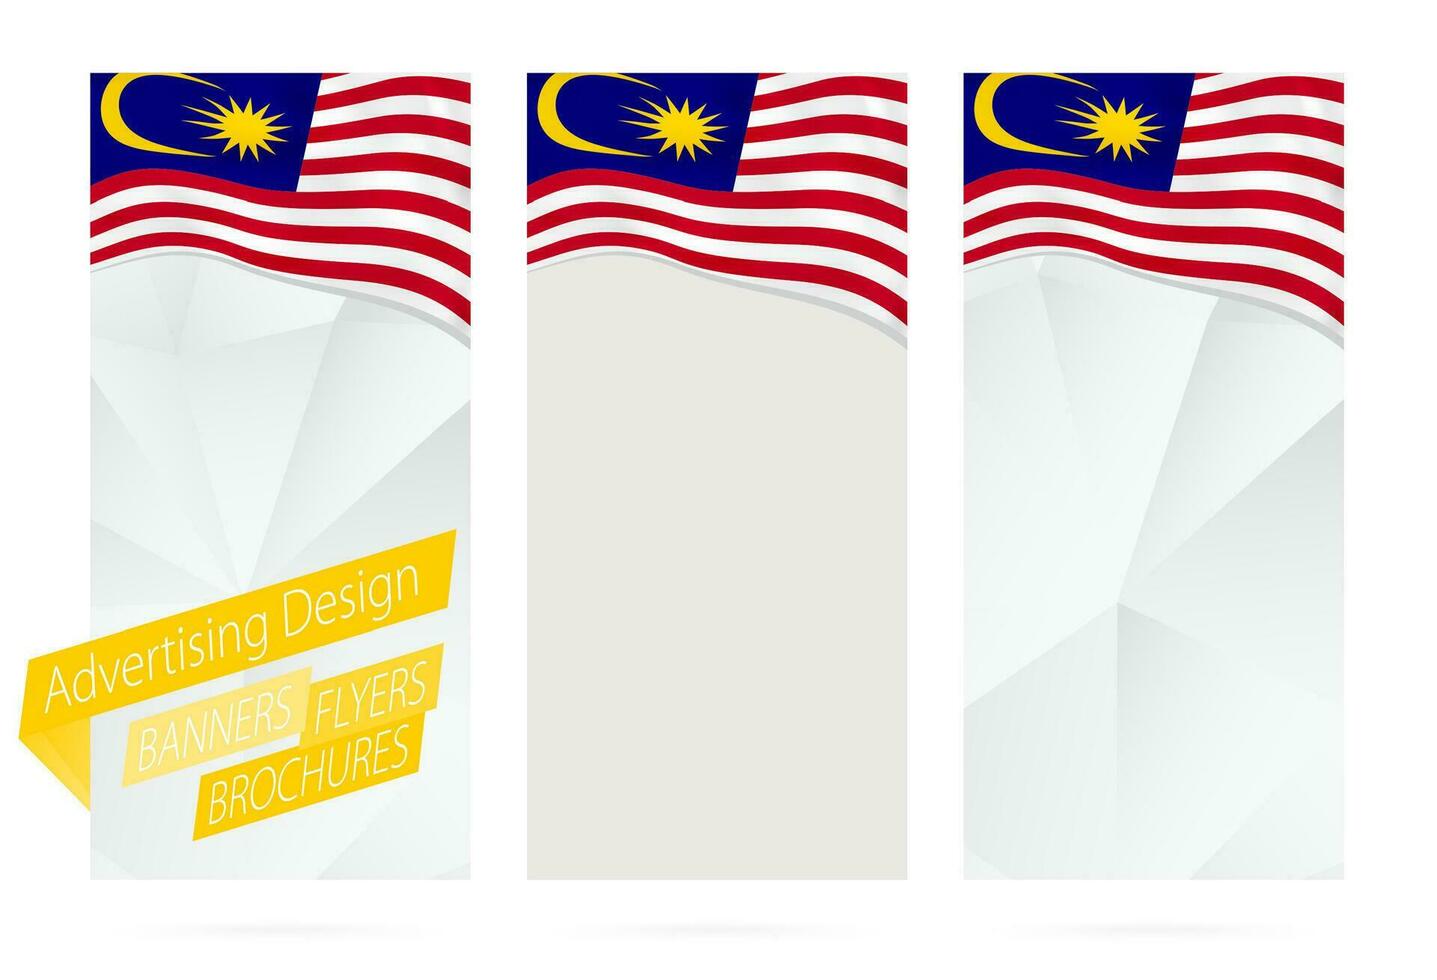 Design of banners, flyers, brochures with flag of Malaysia. vector